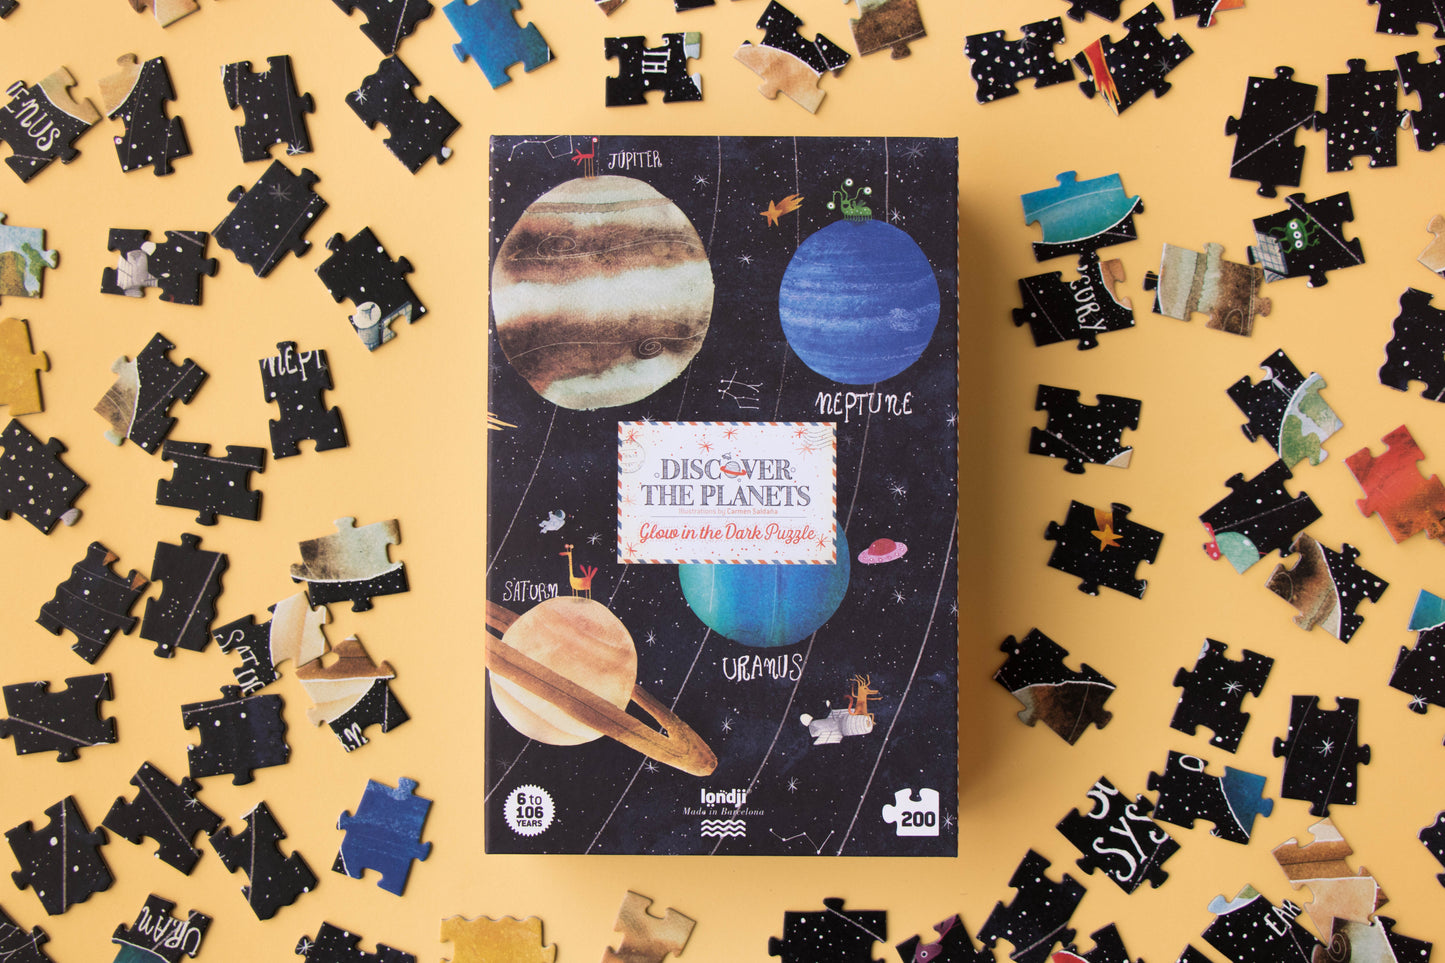 Puzzle "Discover the Planets", 200 Teile, ab 7 Jahren